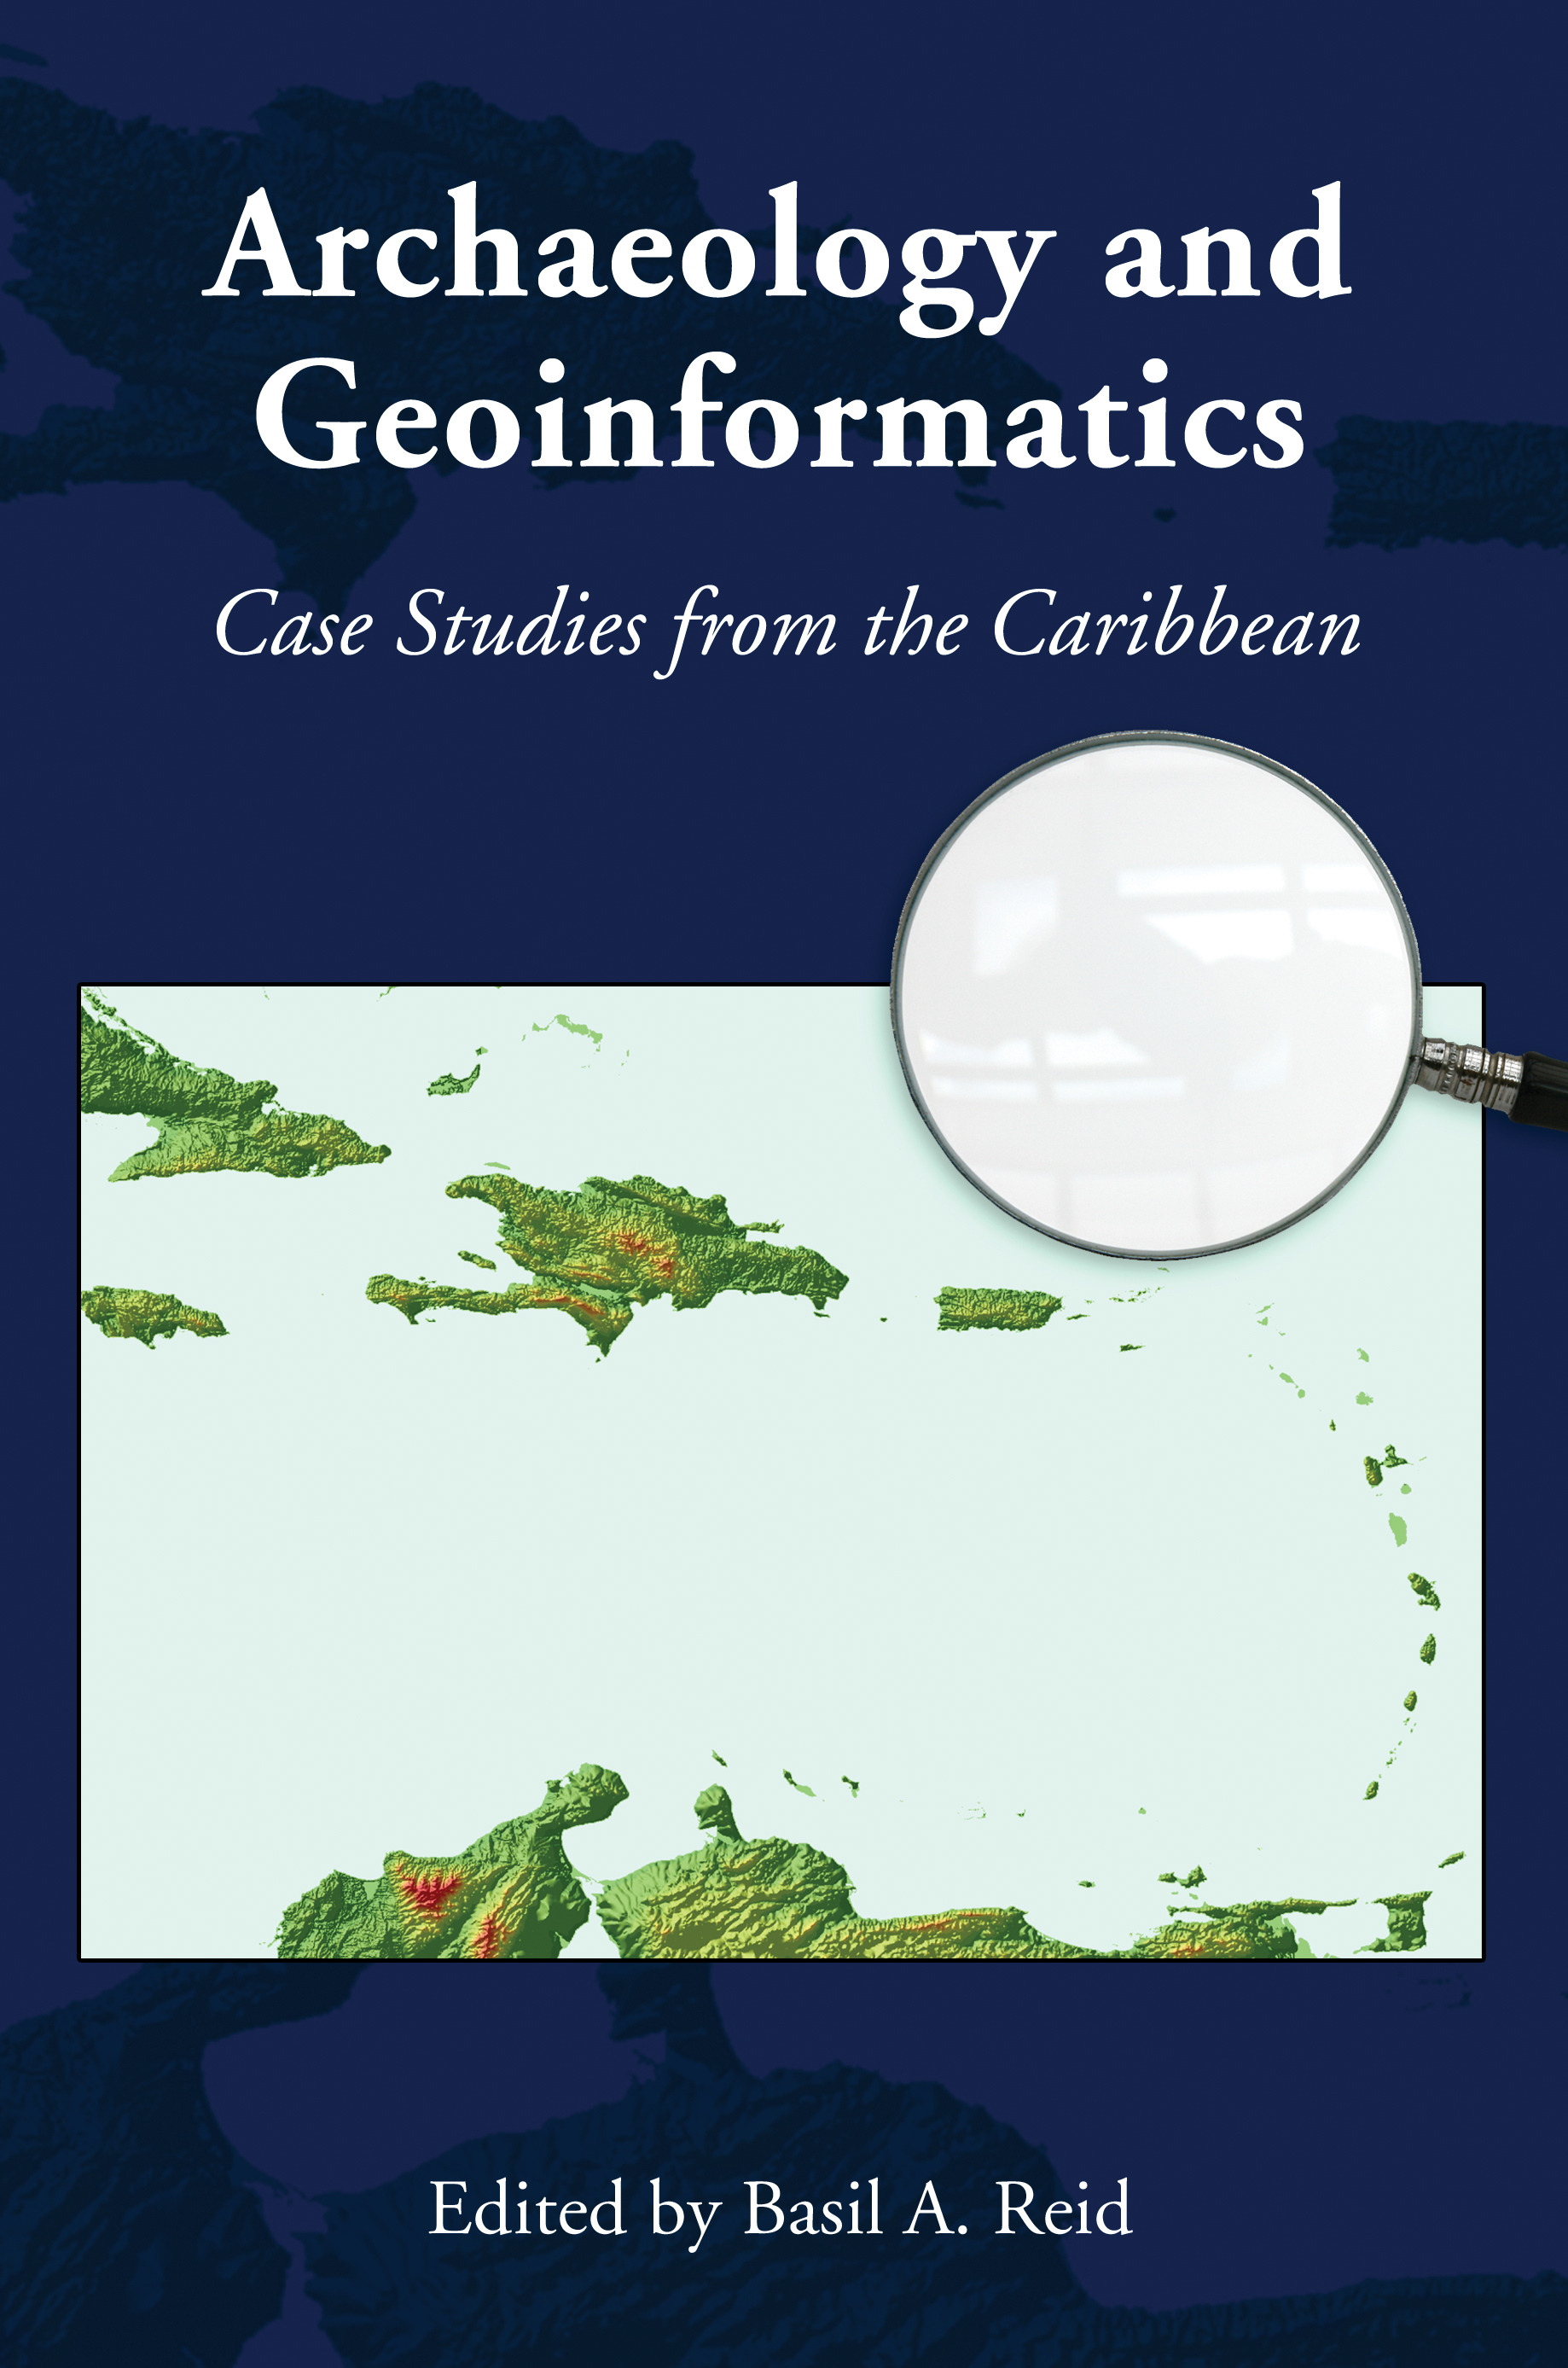 Archaeology and Geoinformatics. Case Studies from the Caribbean, 2008, 296 p.